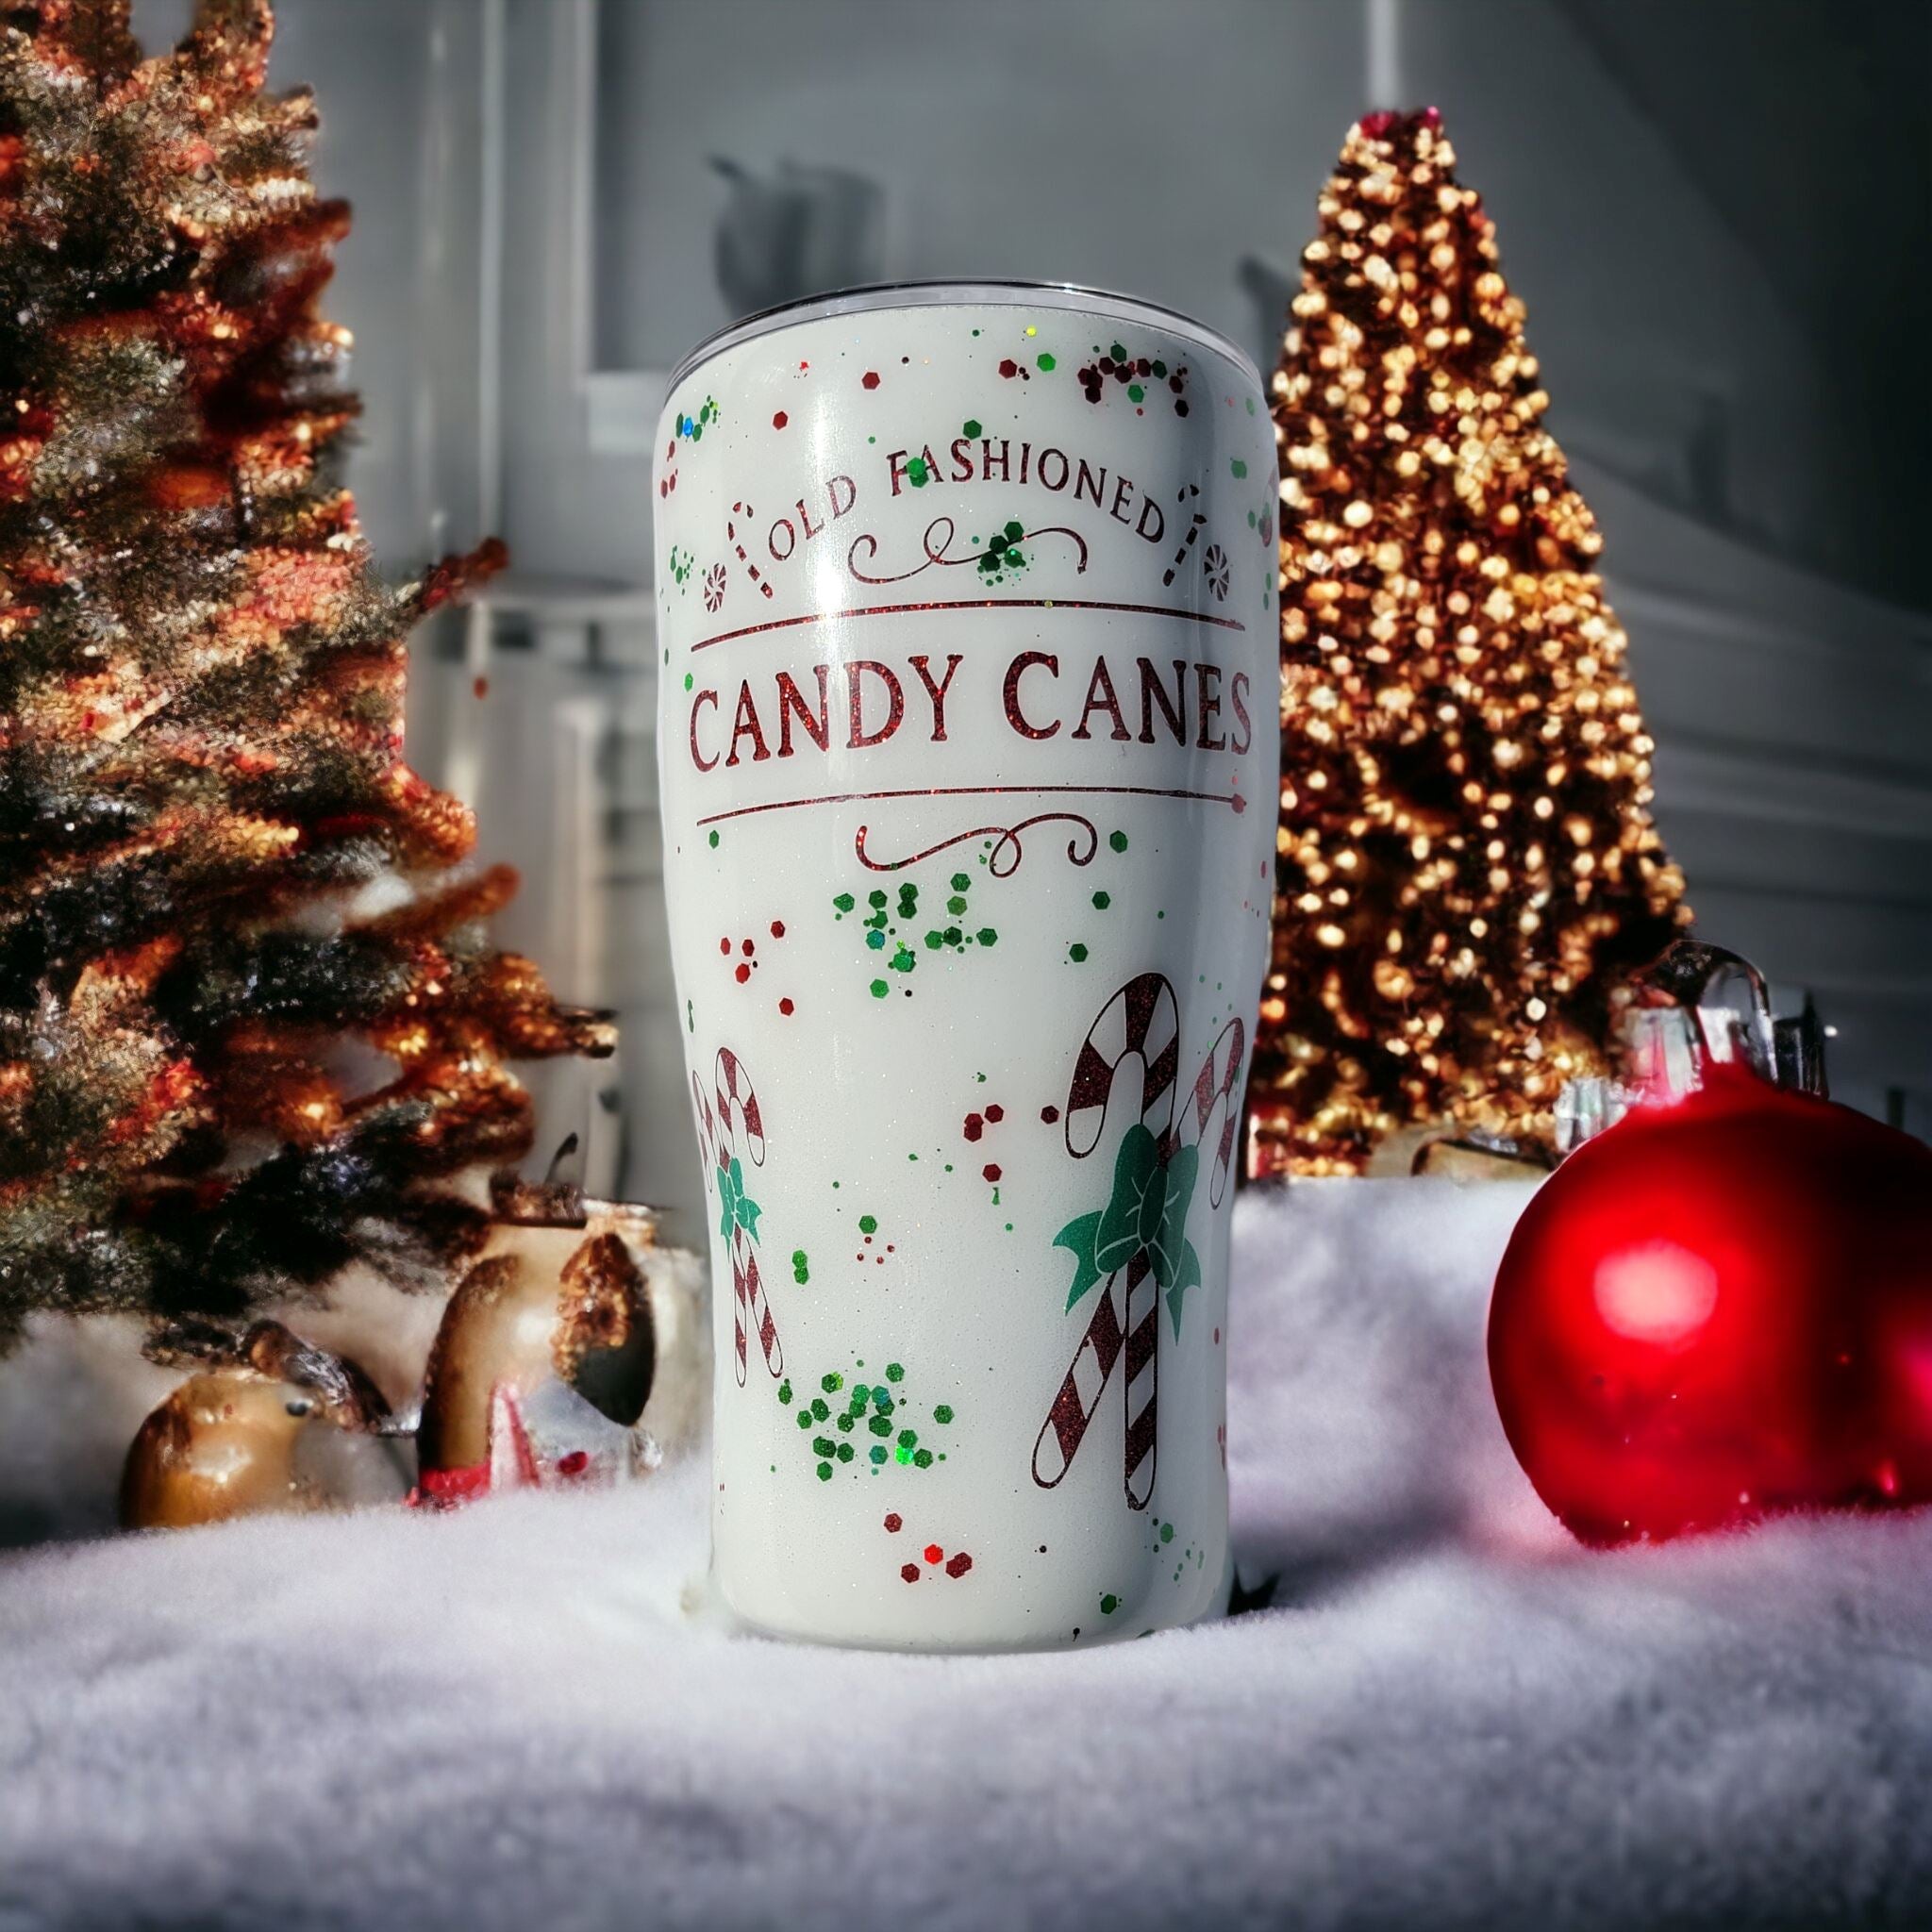 Old fashioned candy cane tumbler Gravesfamilycreations